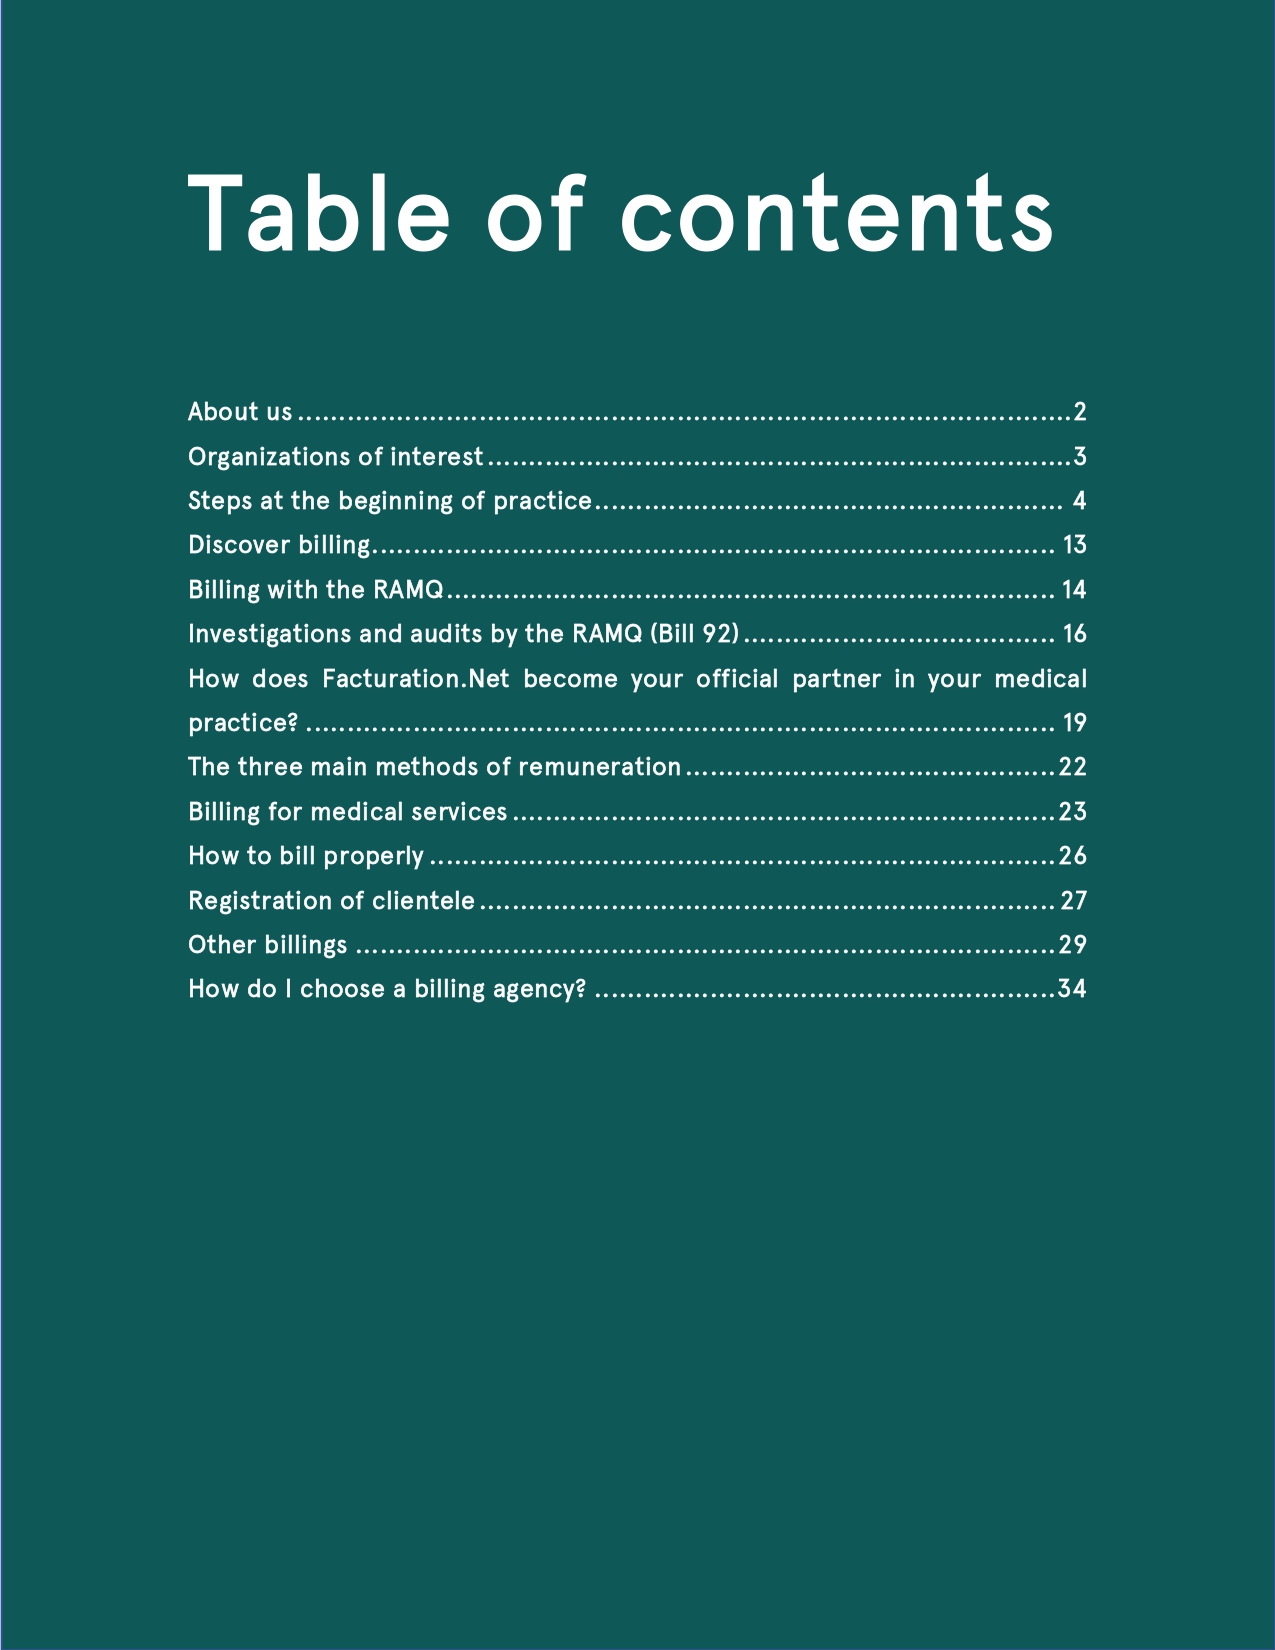 Table of content of the Facturation.net new biller guide